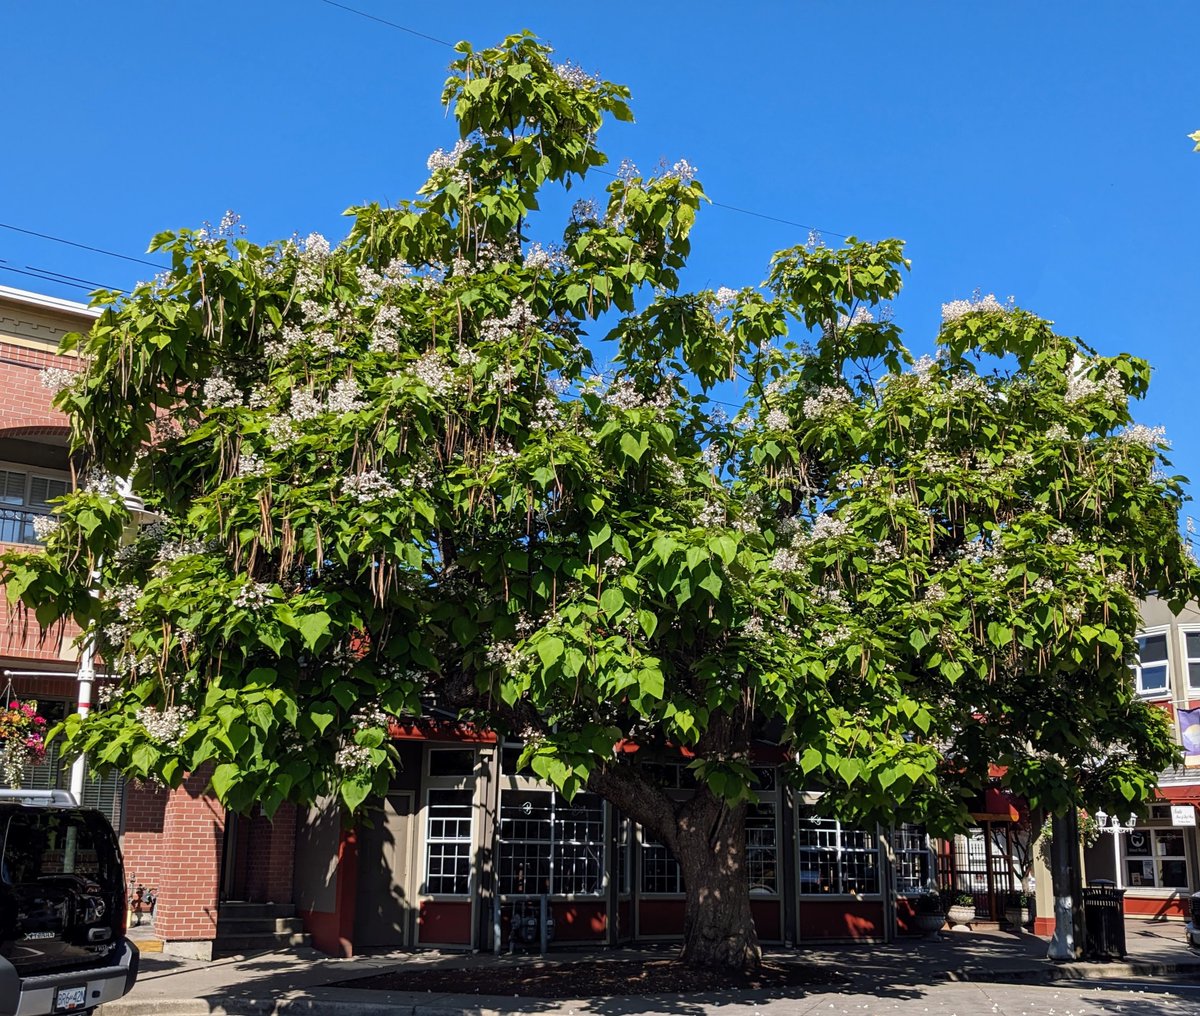 The Catalpa tree on Wesley Street this morning in all its glory.